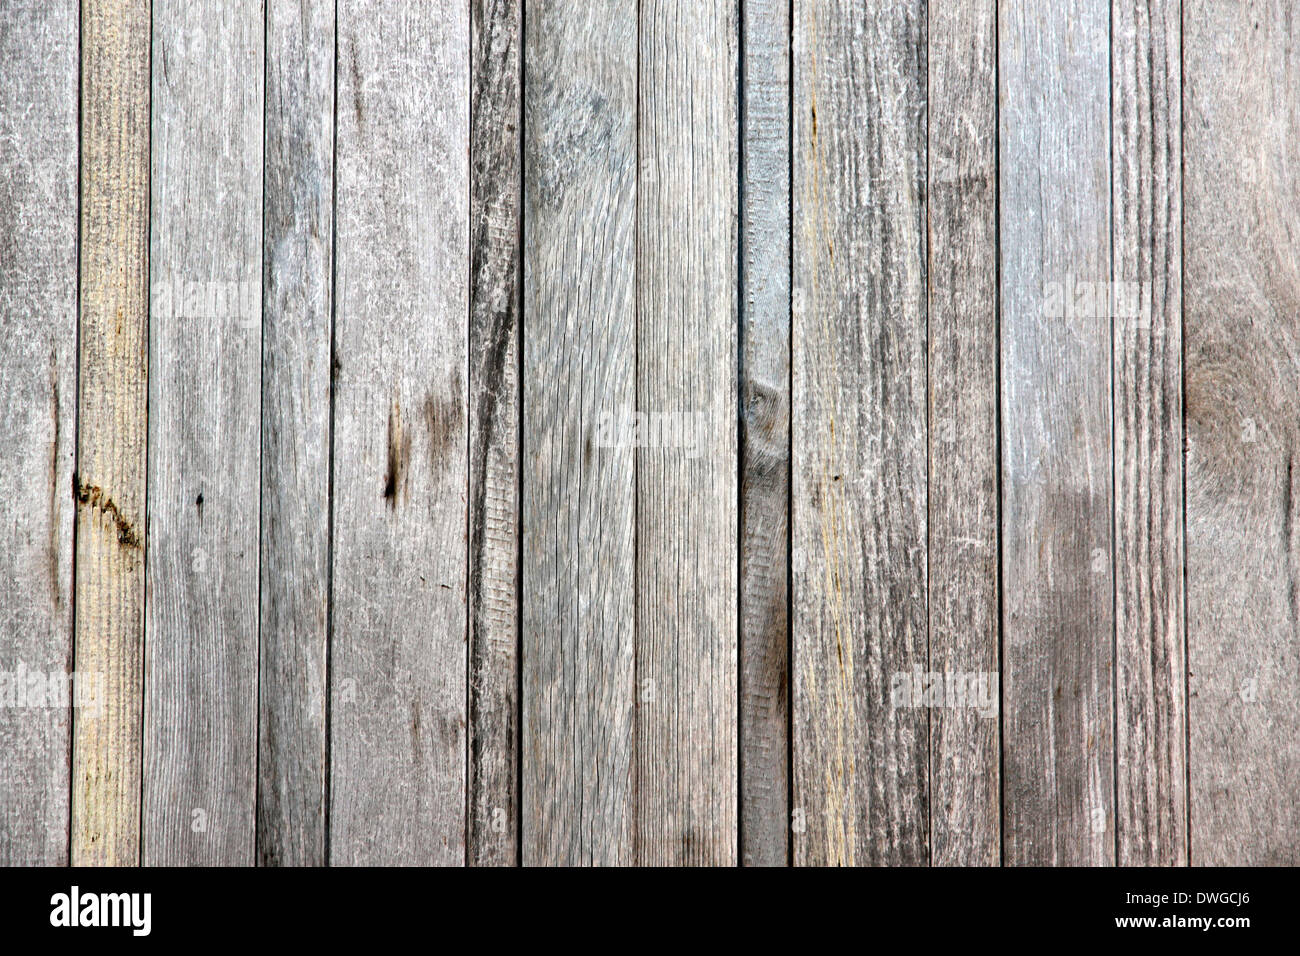 Old wooden walls with natural patterns. Stock Photo